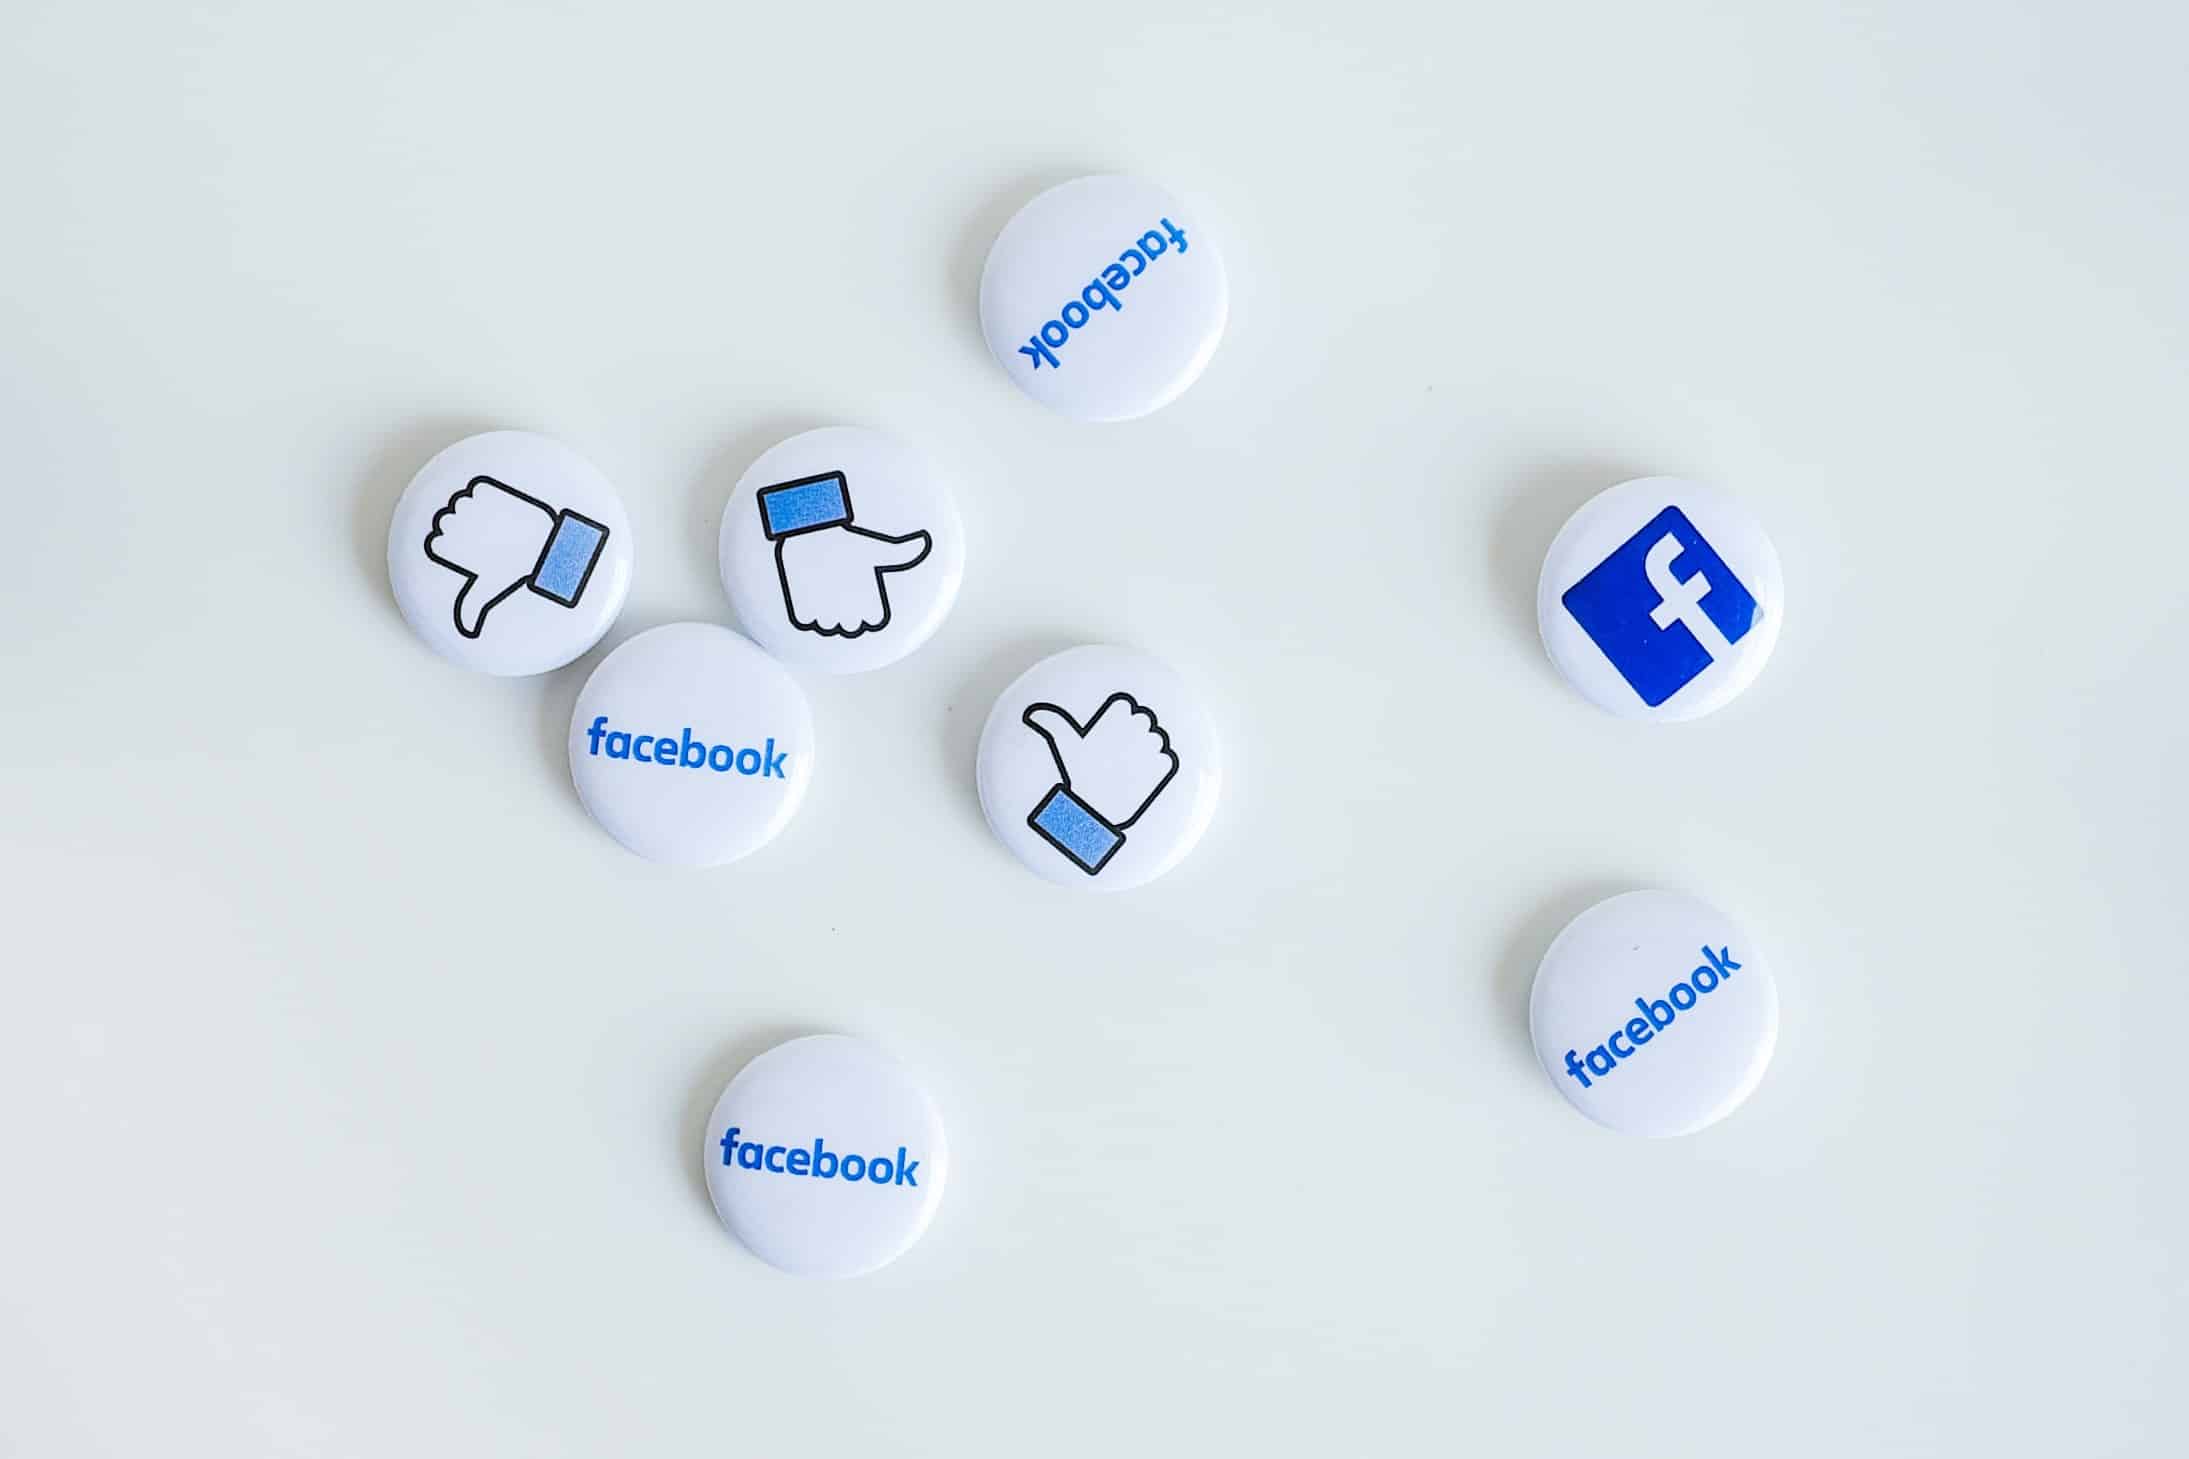 Facebook logo and like symbol on buttons.